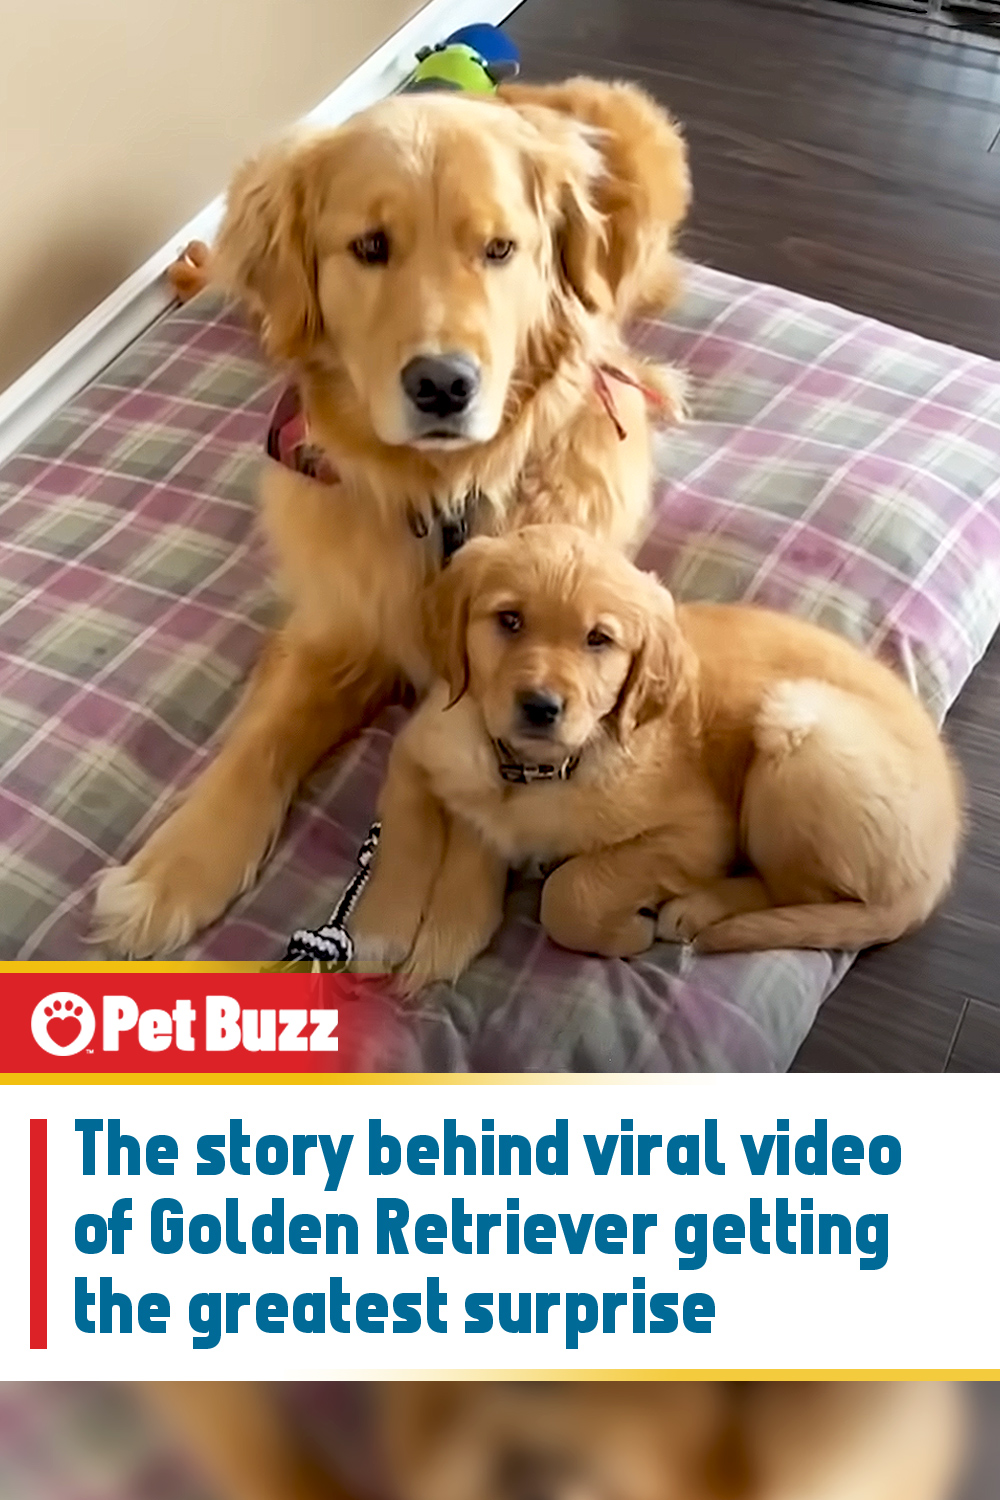 The story behind viral video of Golden Retriever getting the greatest surprise